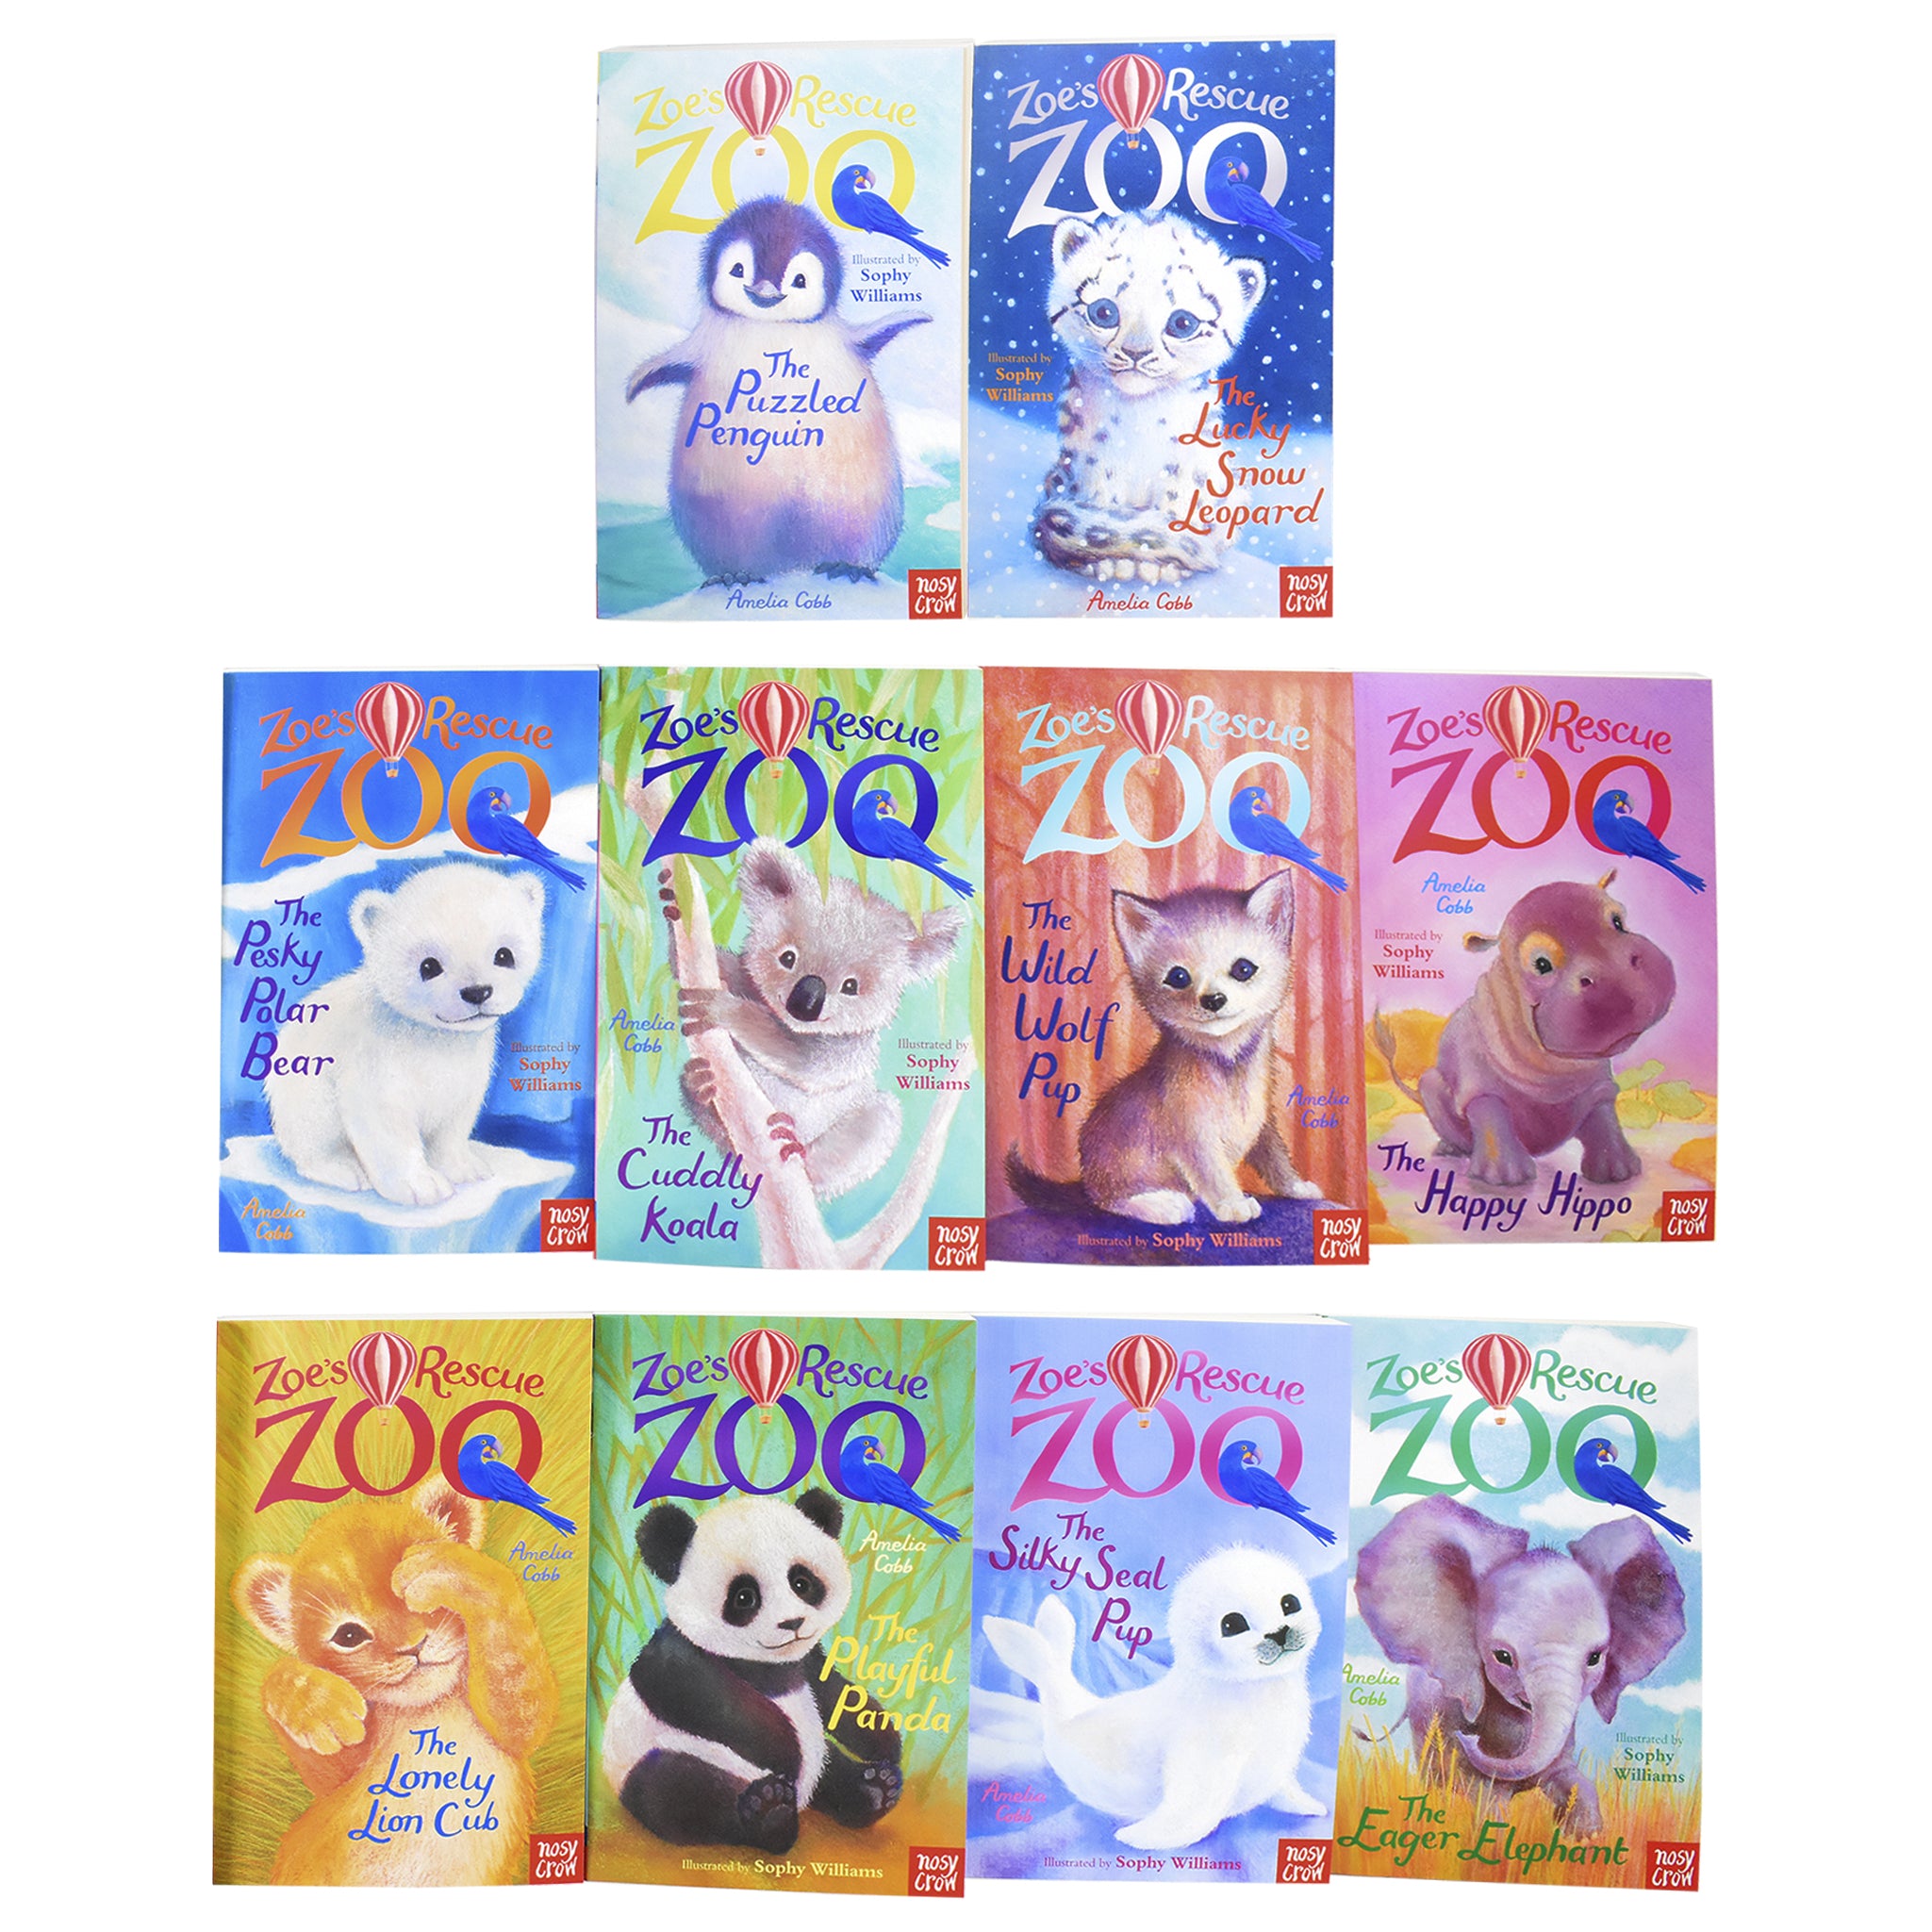 Zoes Rescue Zoo Series 1 By Amelia Cobb 10 Books Collection Set - Ages 5-7 - Paperback